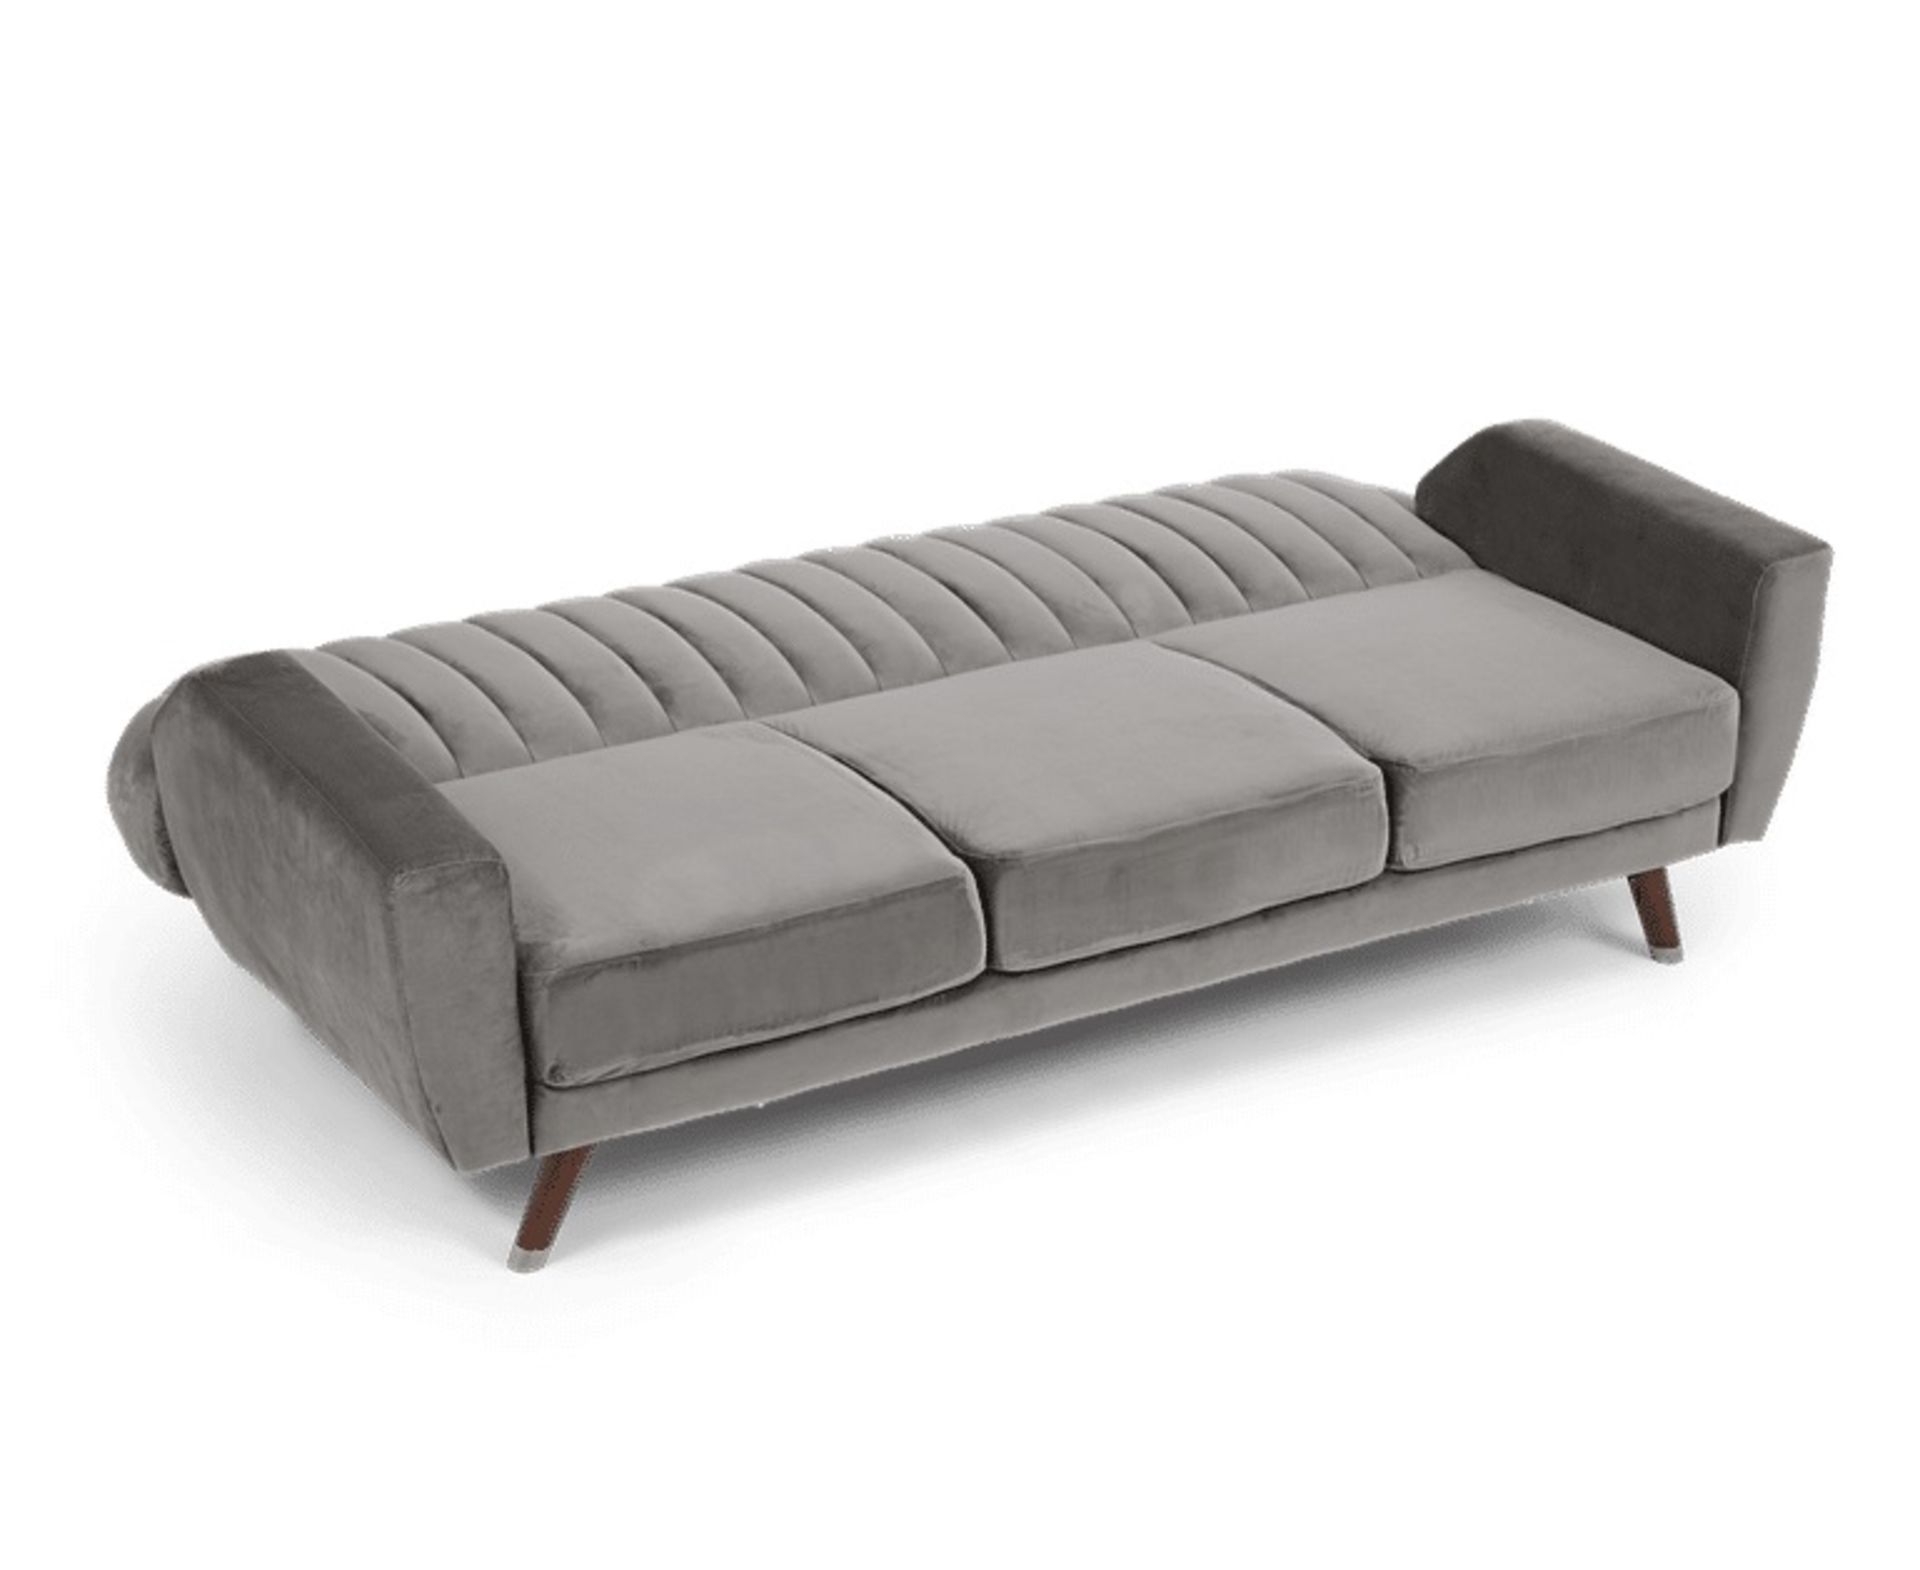 Lucia Reversible Sofa Bed in Grey Velvet Retro-inspired and minimalist in shape, the Lucia - Image 2 of 2